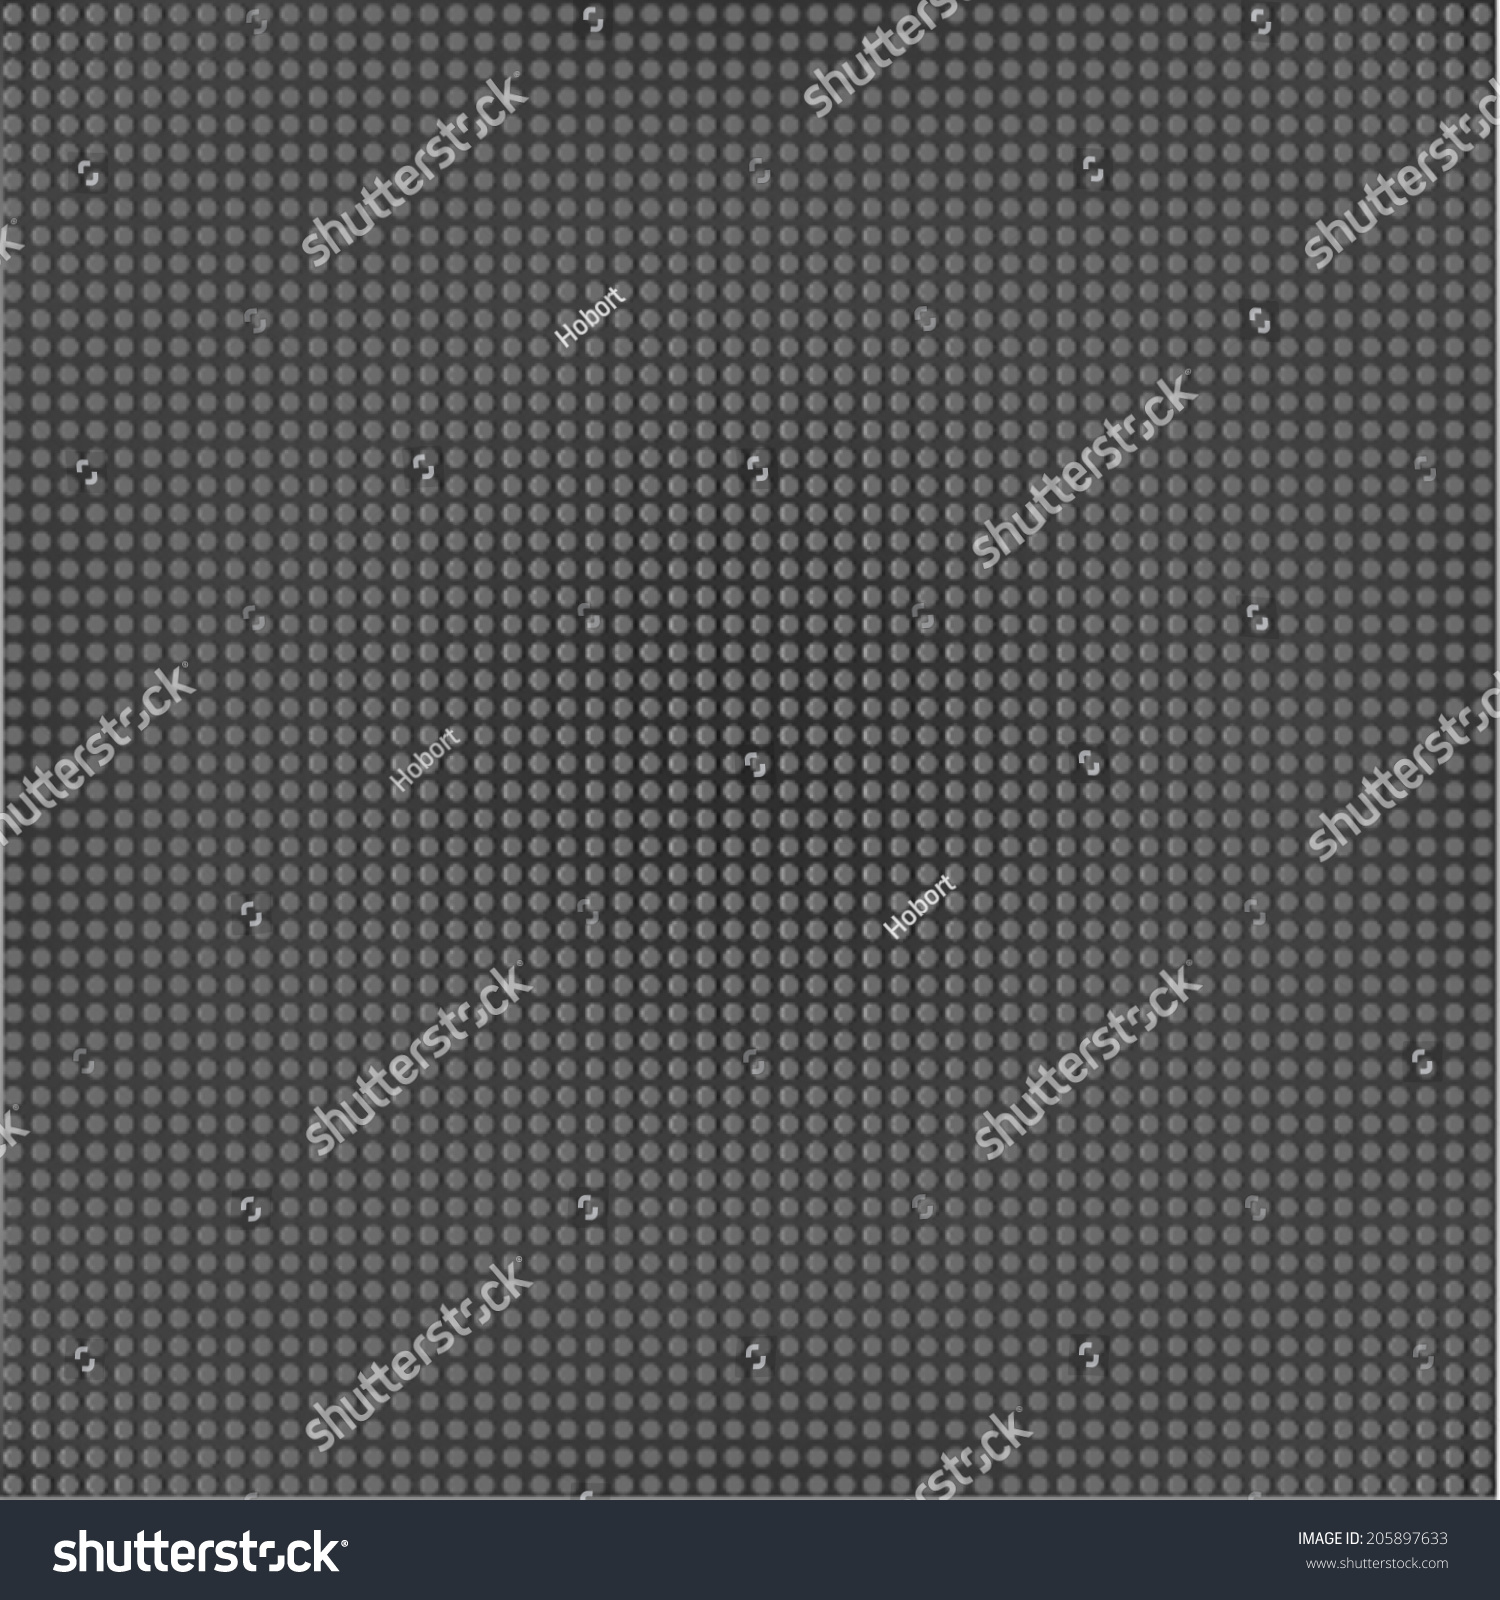 Checked Monotone Background Illustration Your Business Stock Vector ...